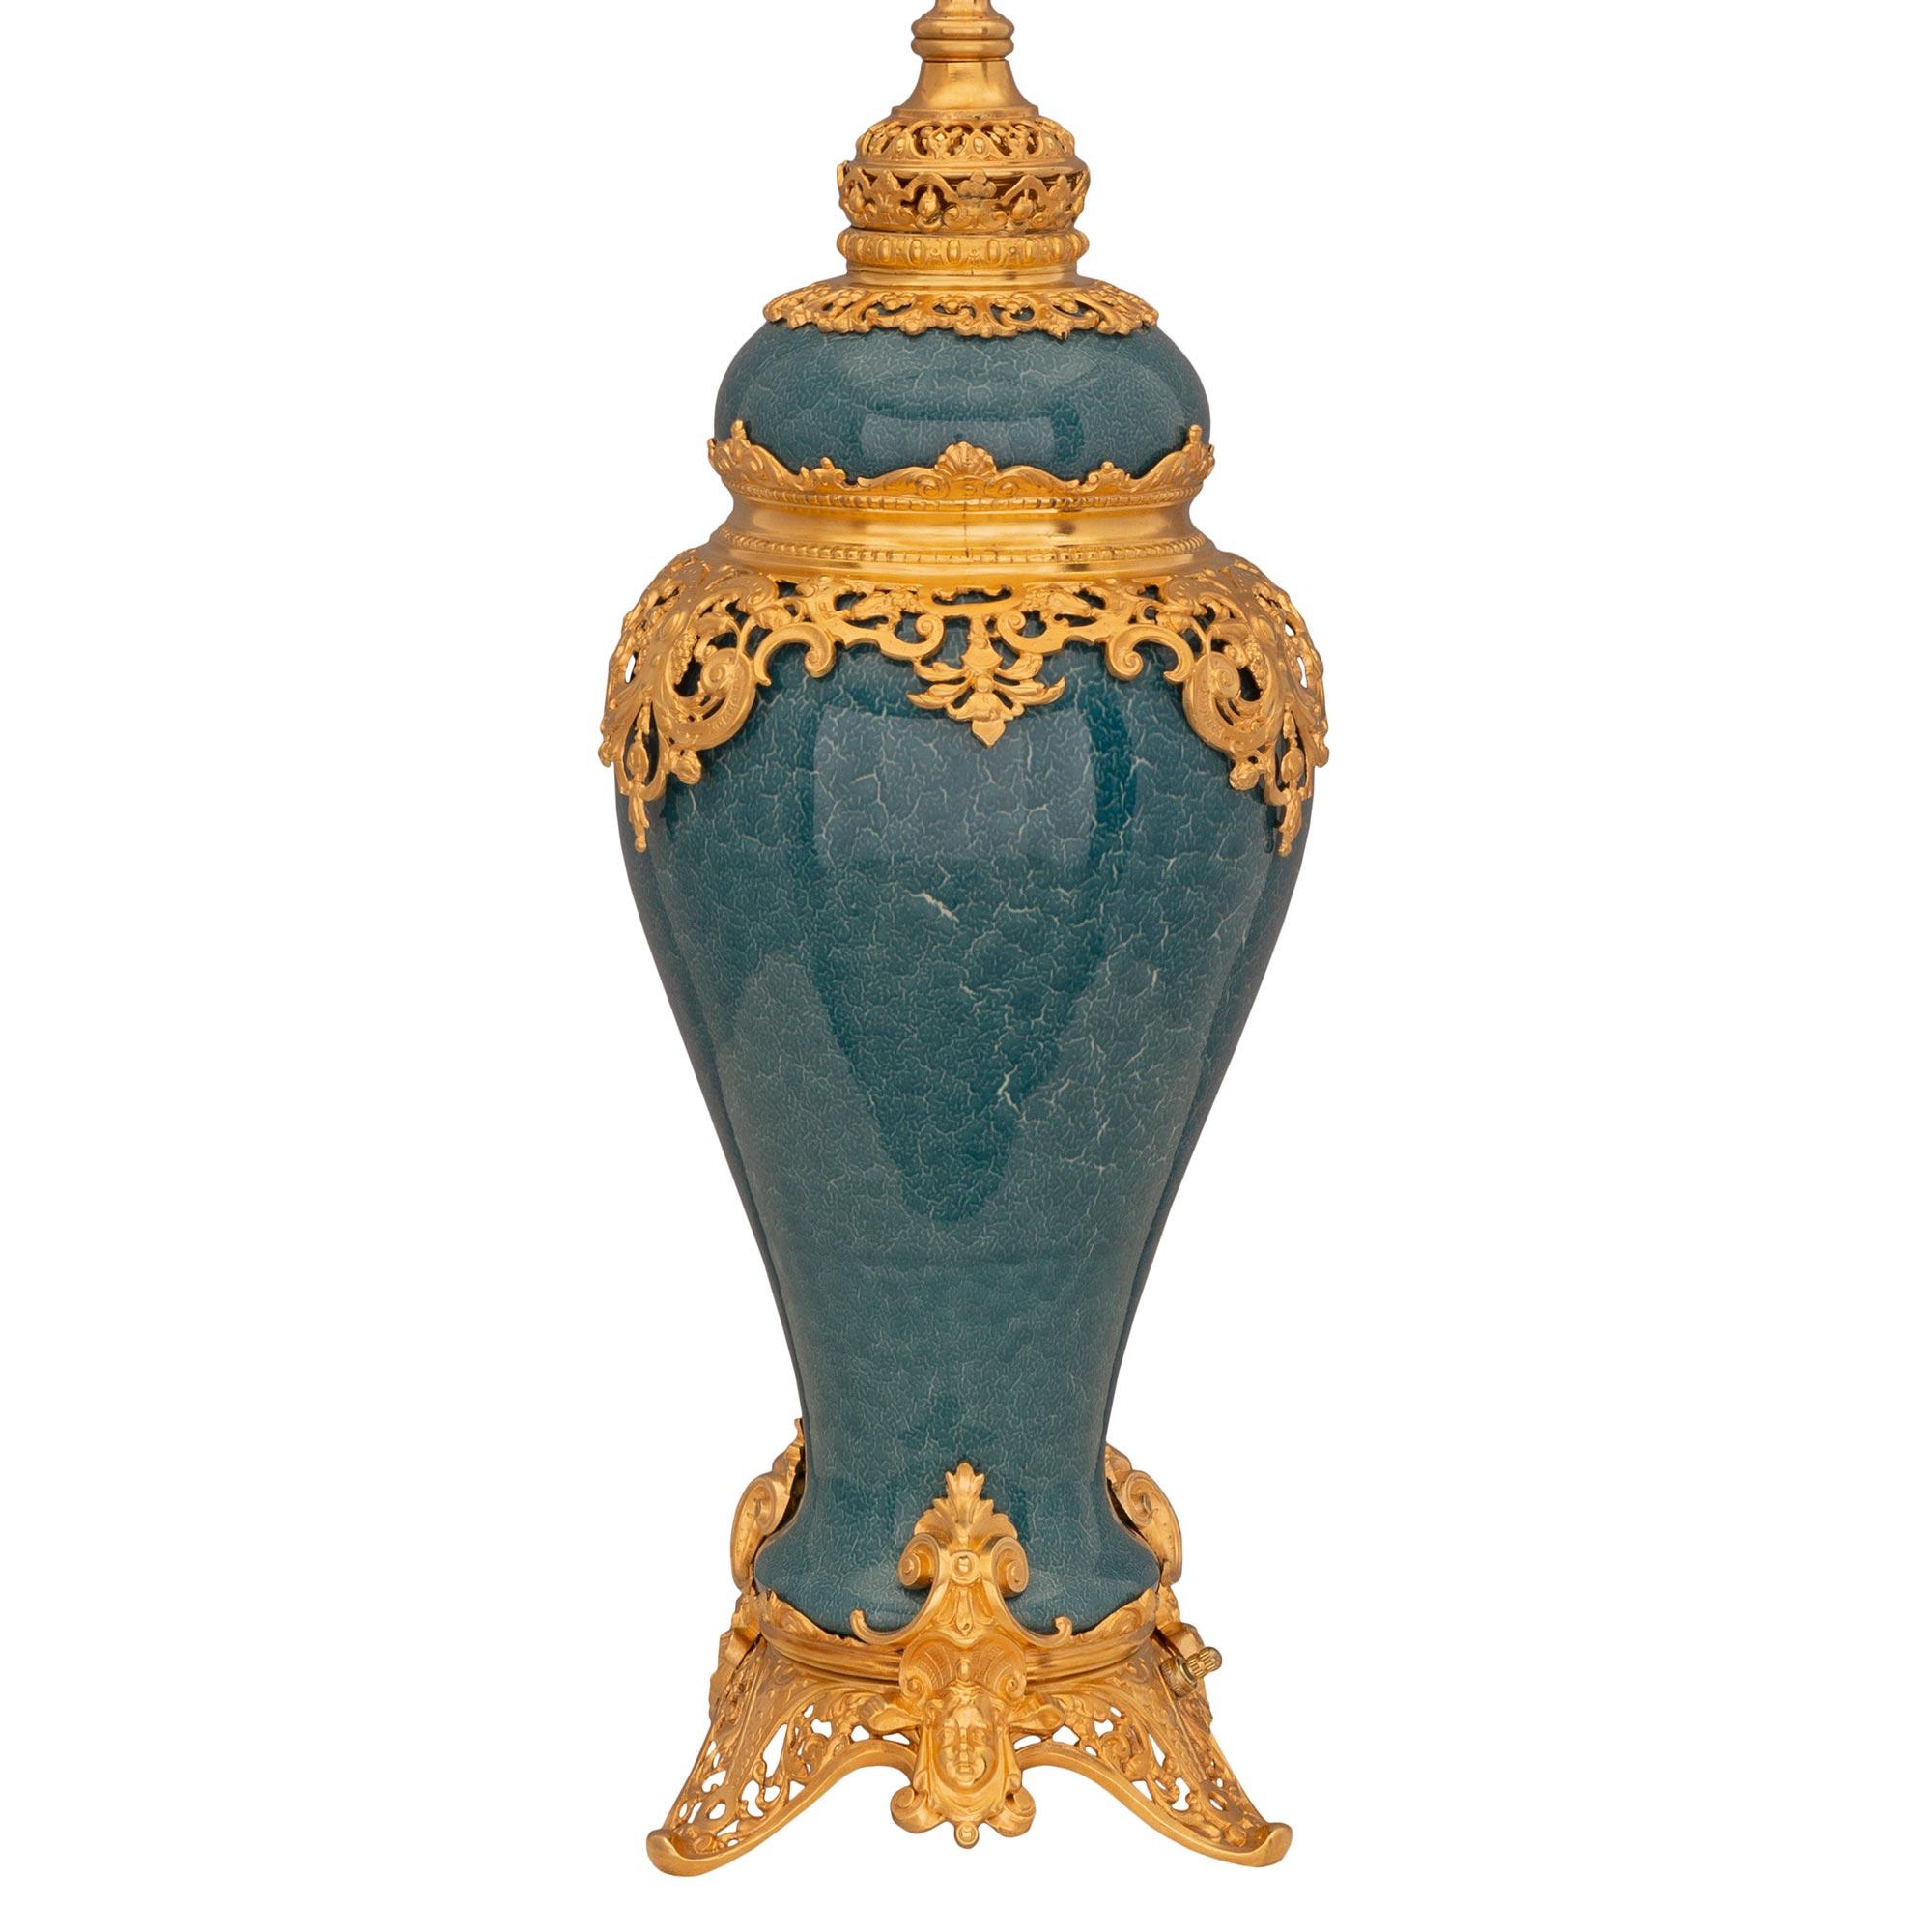 A striking and very unique pair of French and Asian collaboration 19th century Régence st. porcelain and ormolu vases mounted into lamps. Each lamp is raised by a finely detailed pierced ormolu base with elegant scrolled foliate designs and richly